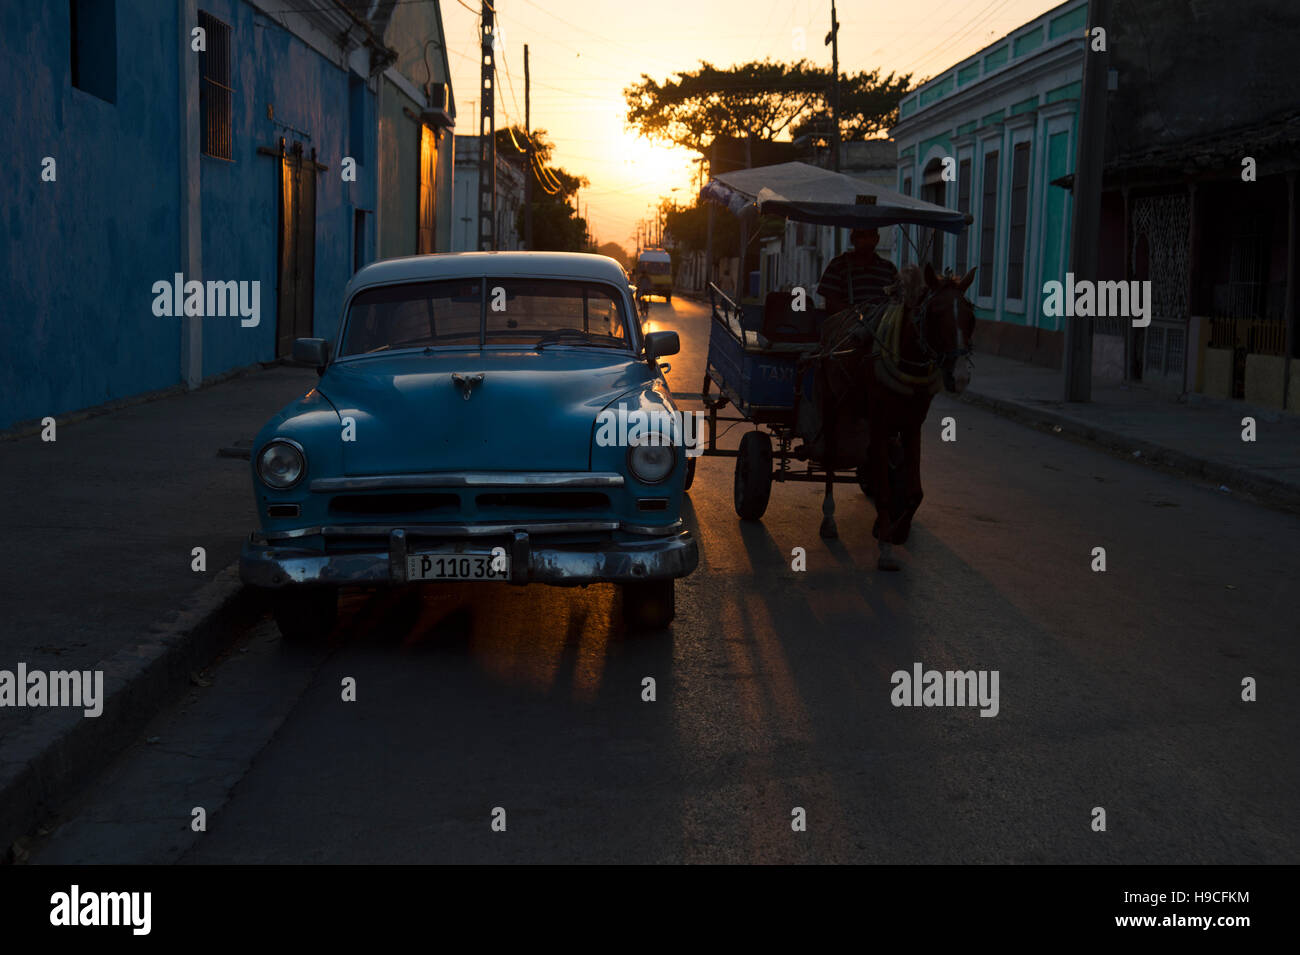 A horse and cart passes a classic US vintage car pared on a street in Cienfuegos Cuba with the sun setting behind Stock Photo